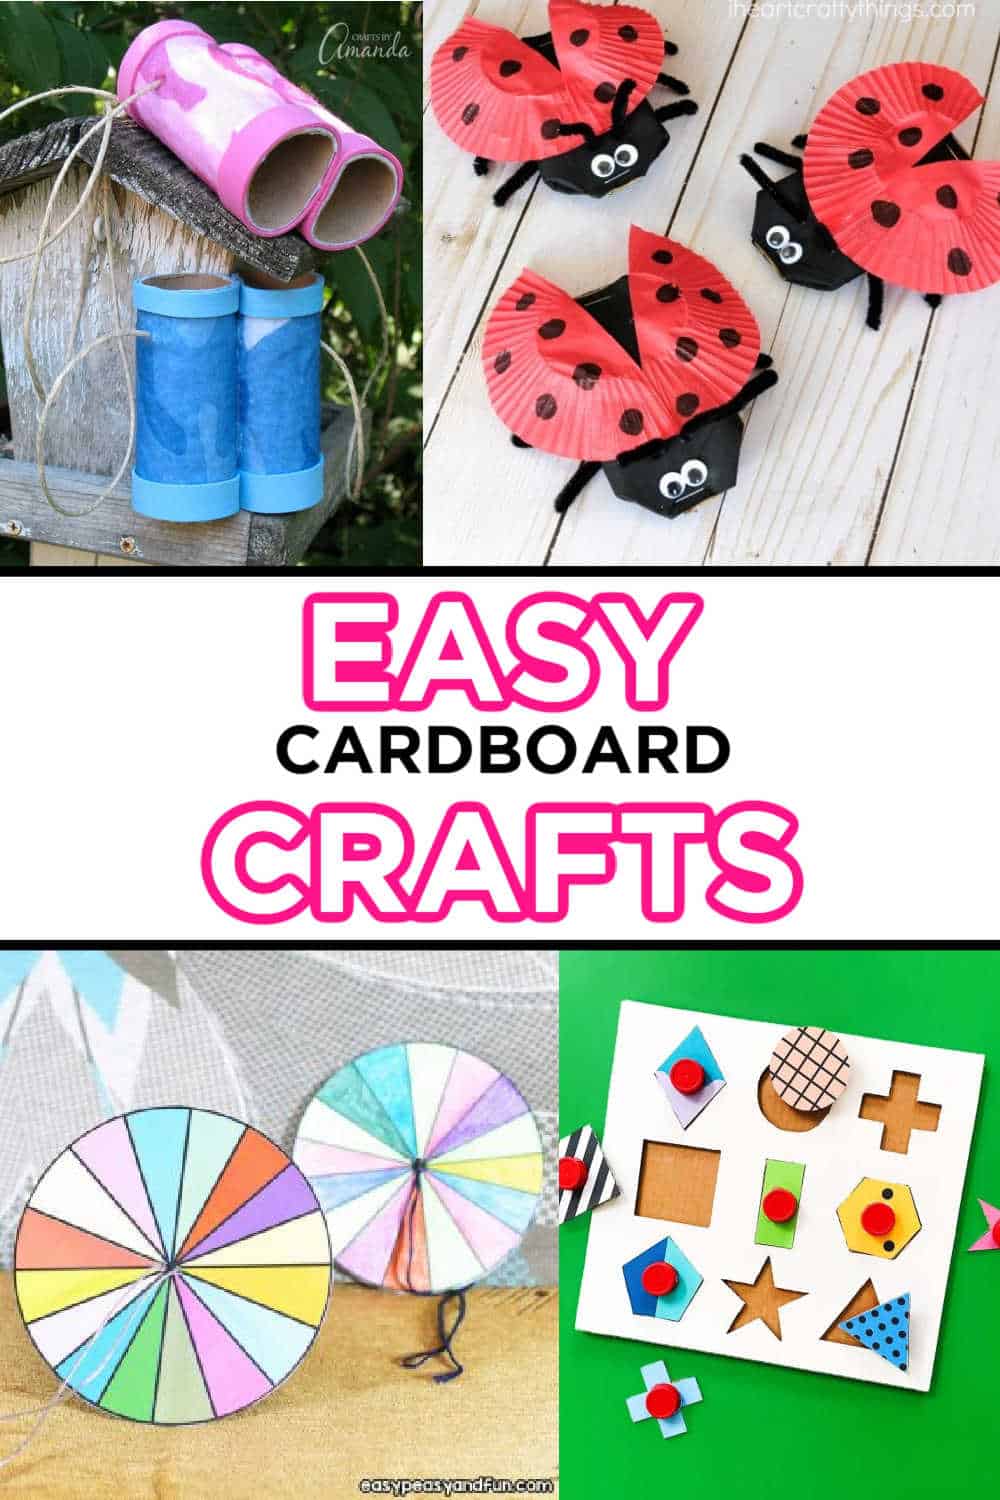 TP Roll Gift Box Ideas - Red Ted Art - Kids Crafts